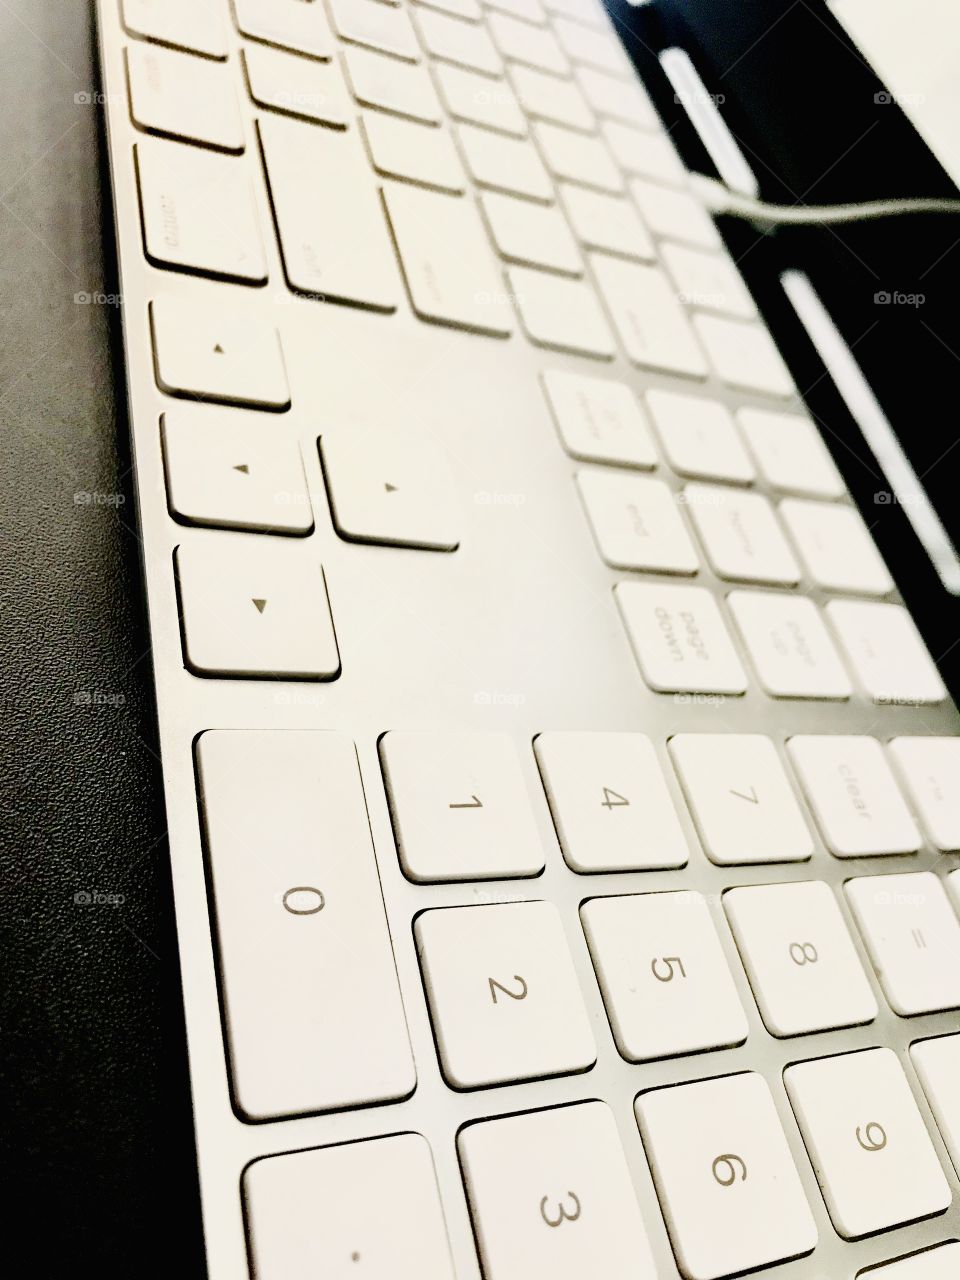 Fun angle for photographing this sleek white Apple keyboard on ultra black desk! 